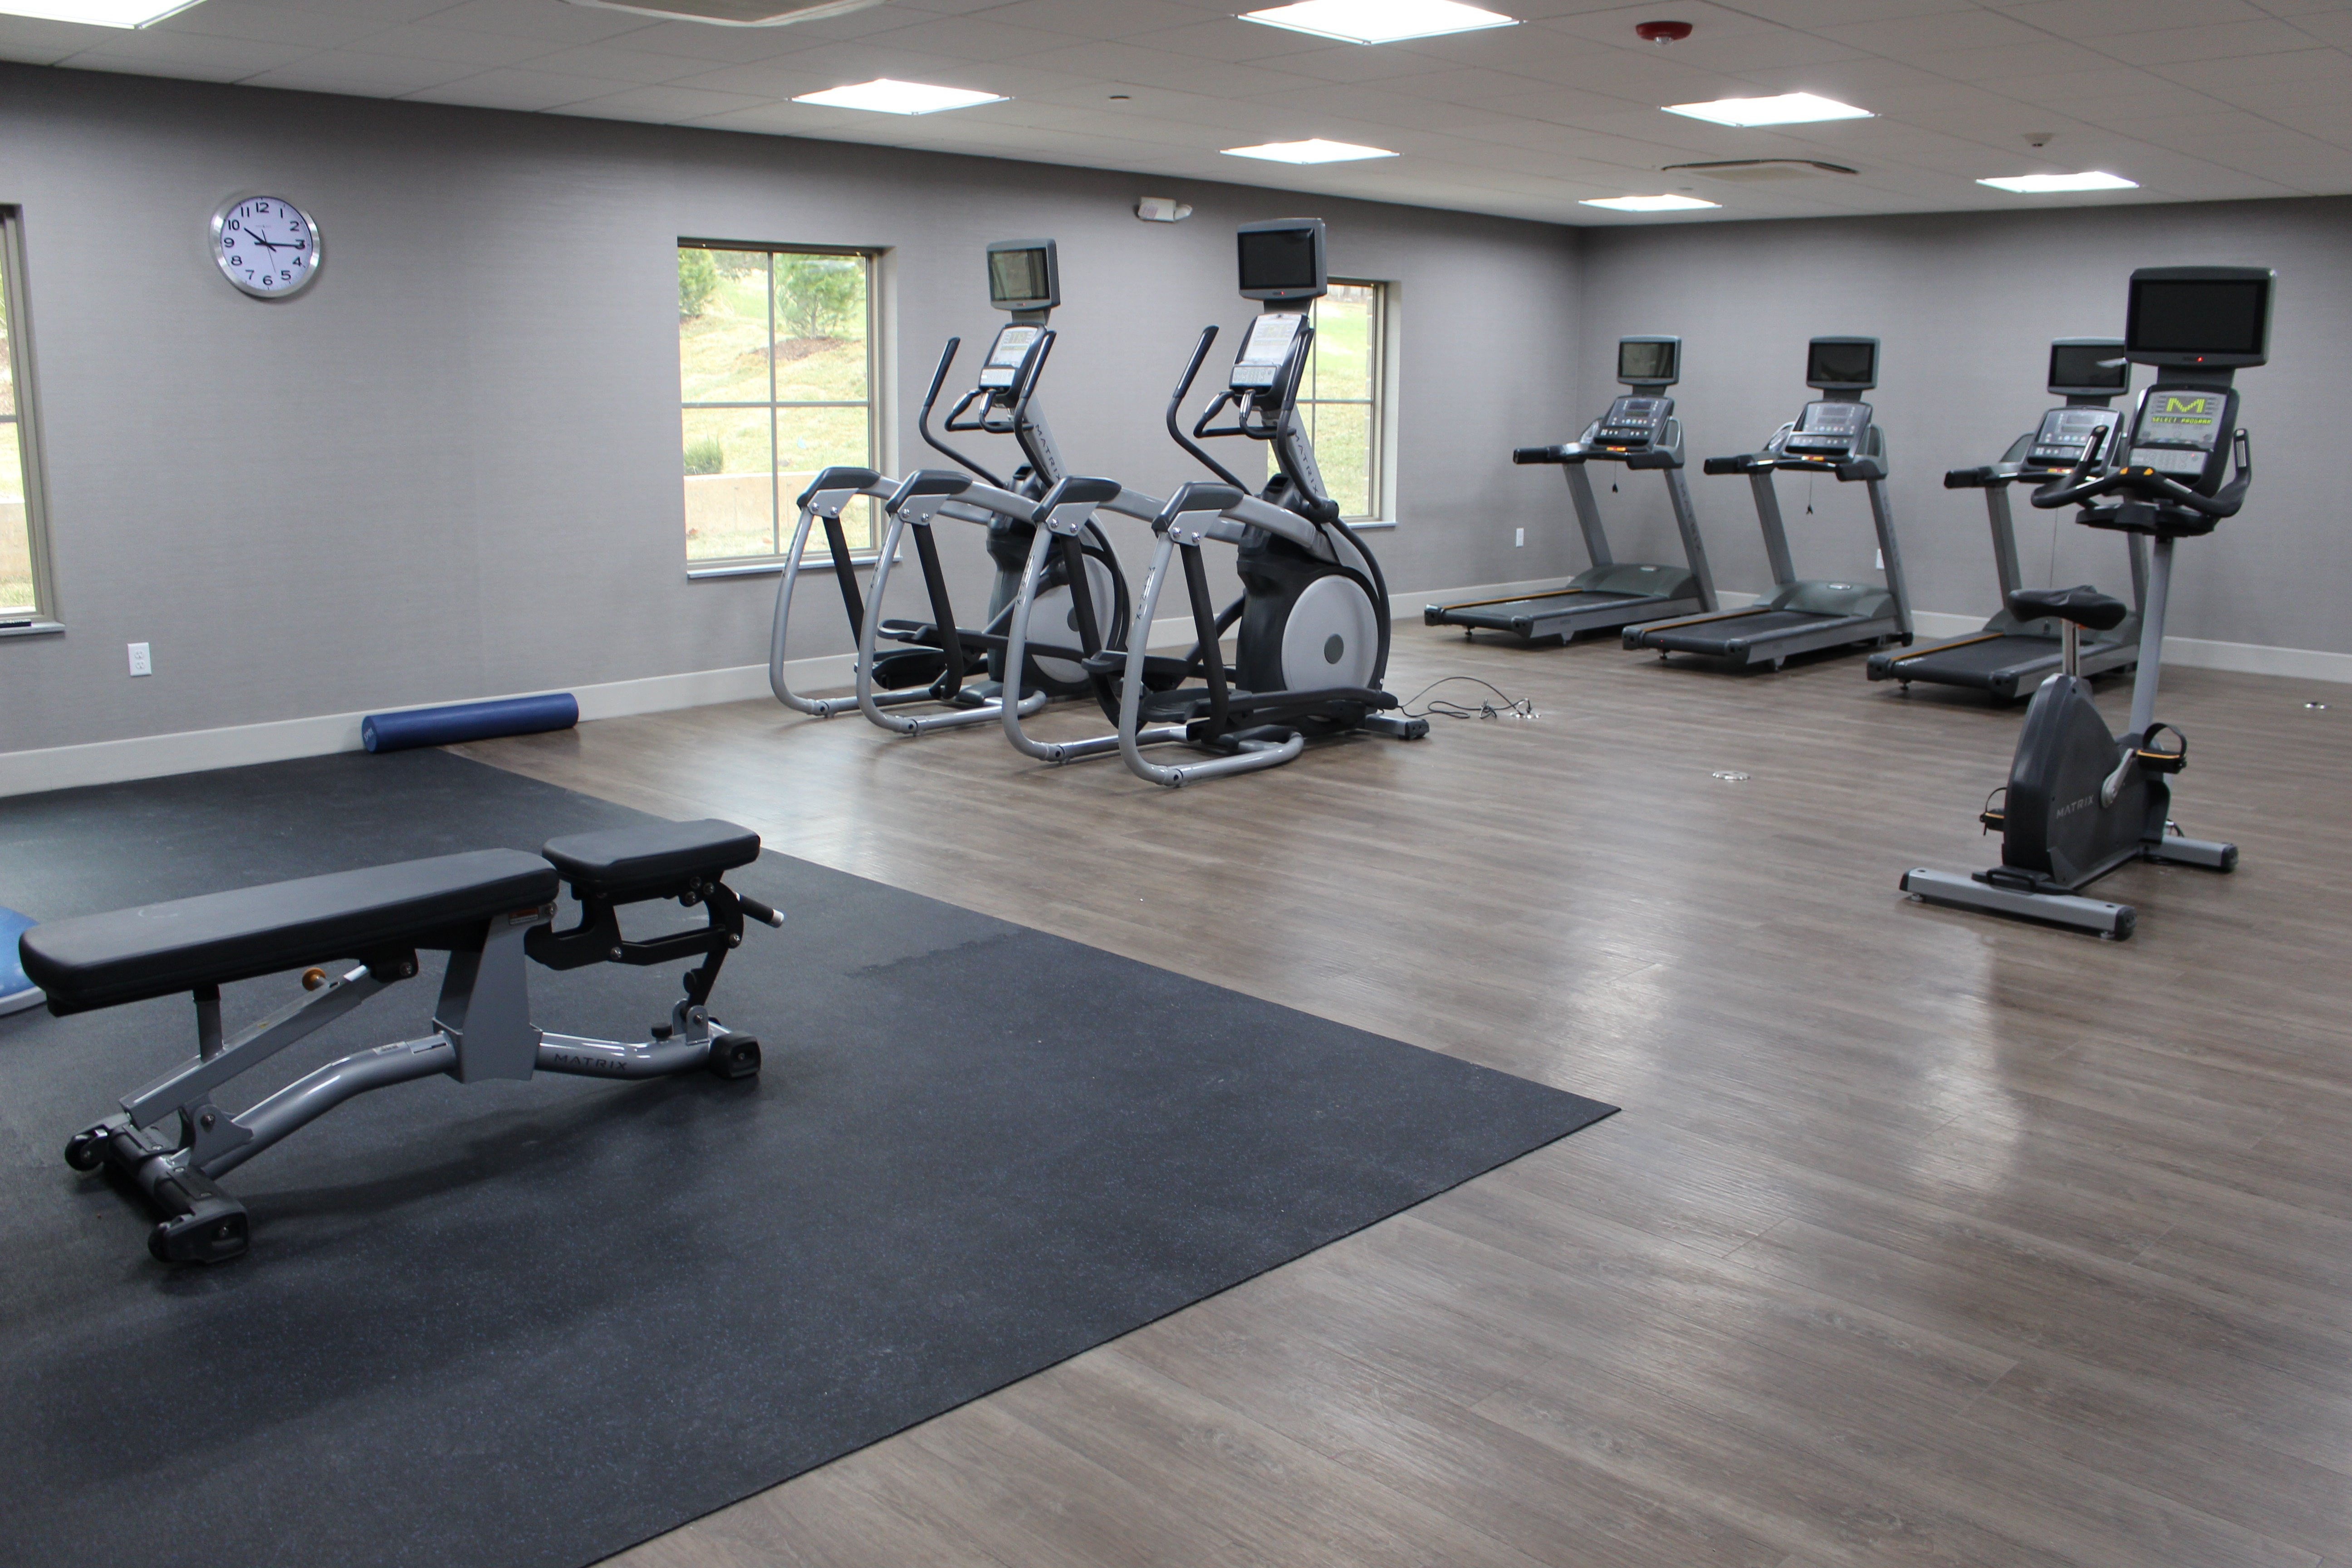 Large state of the arts fitness center